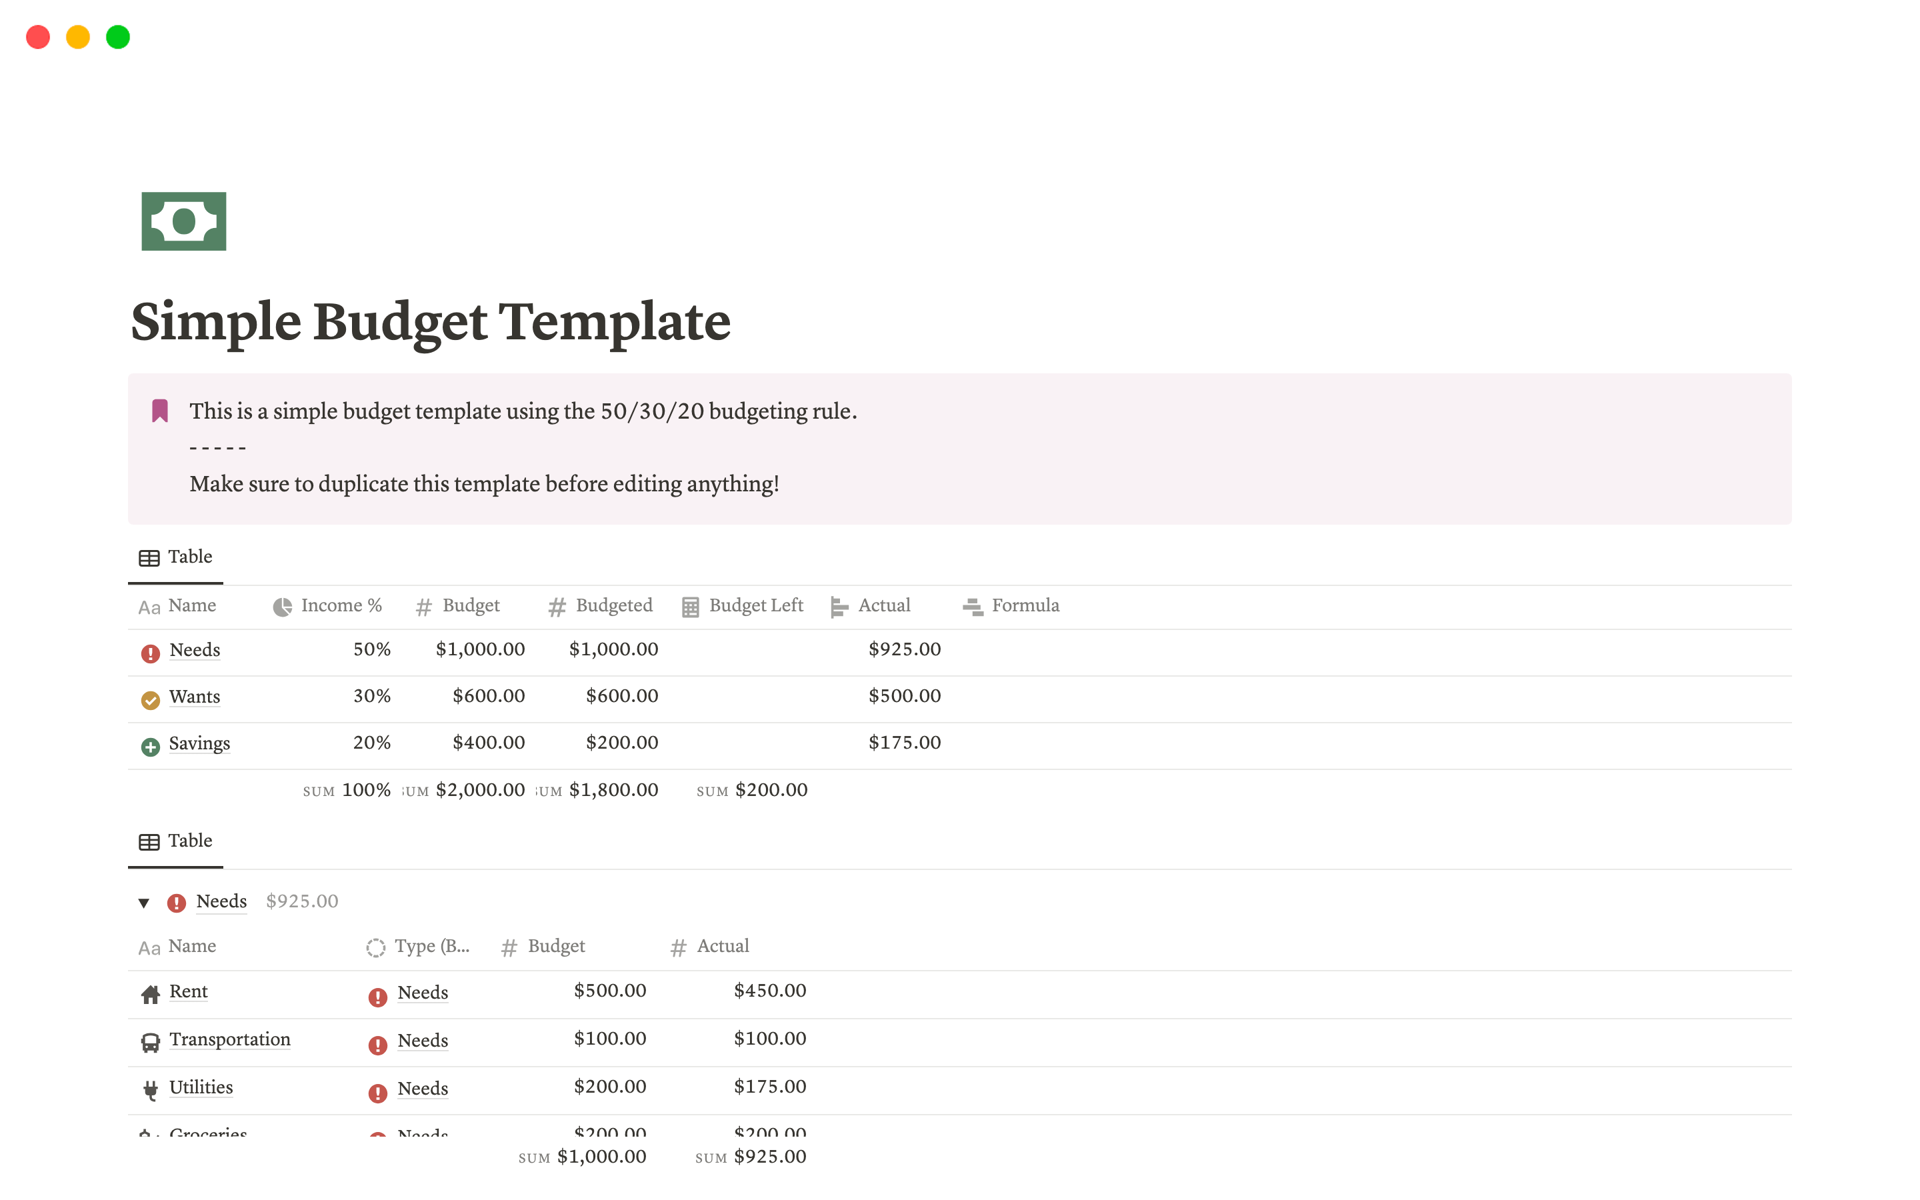 This is a simple budget template using the 50/30/20 budgeting rule.